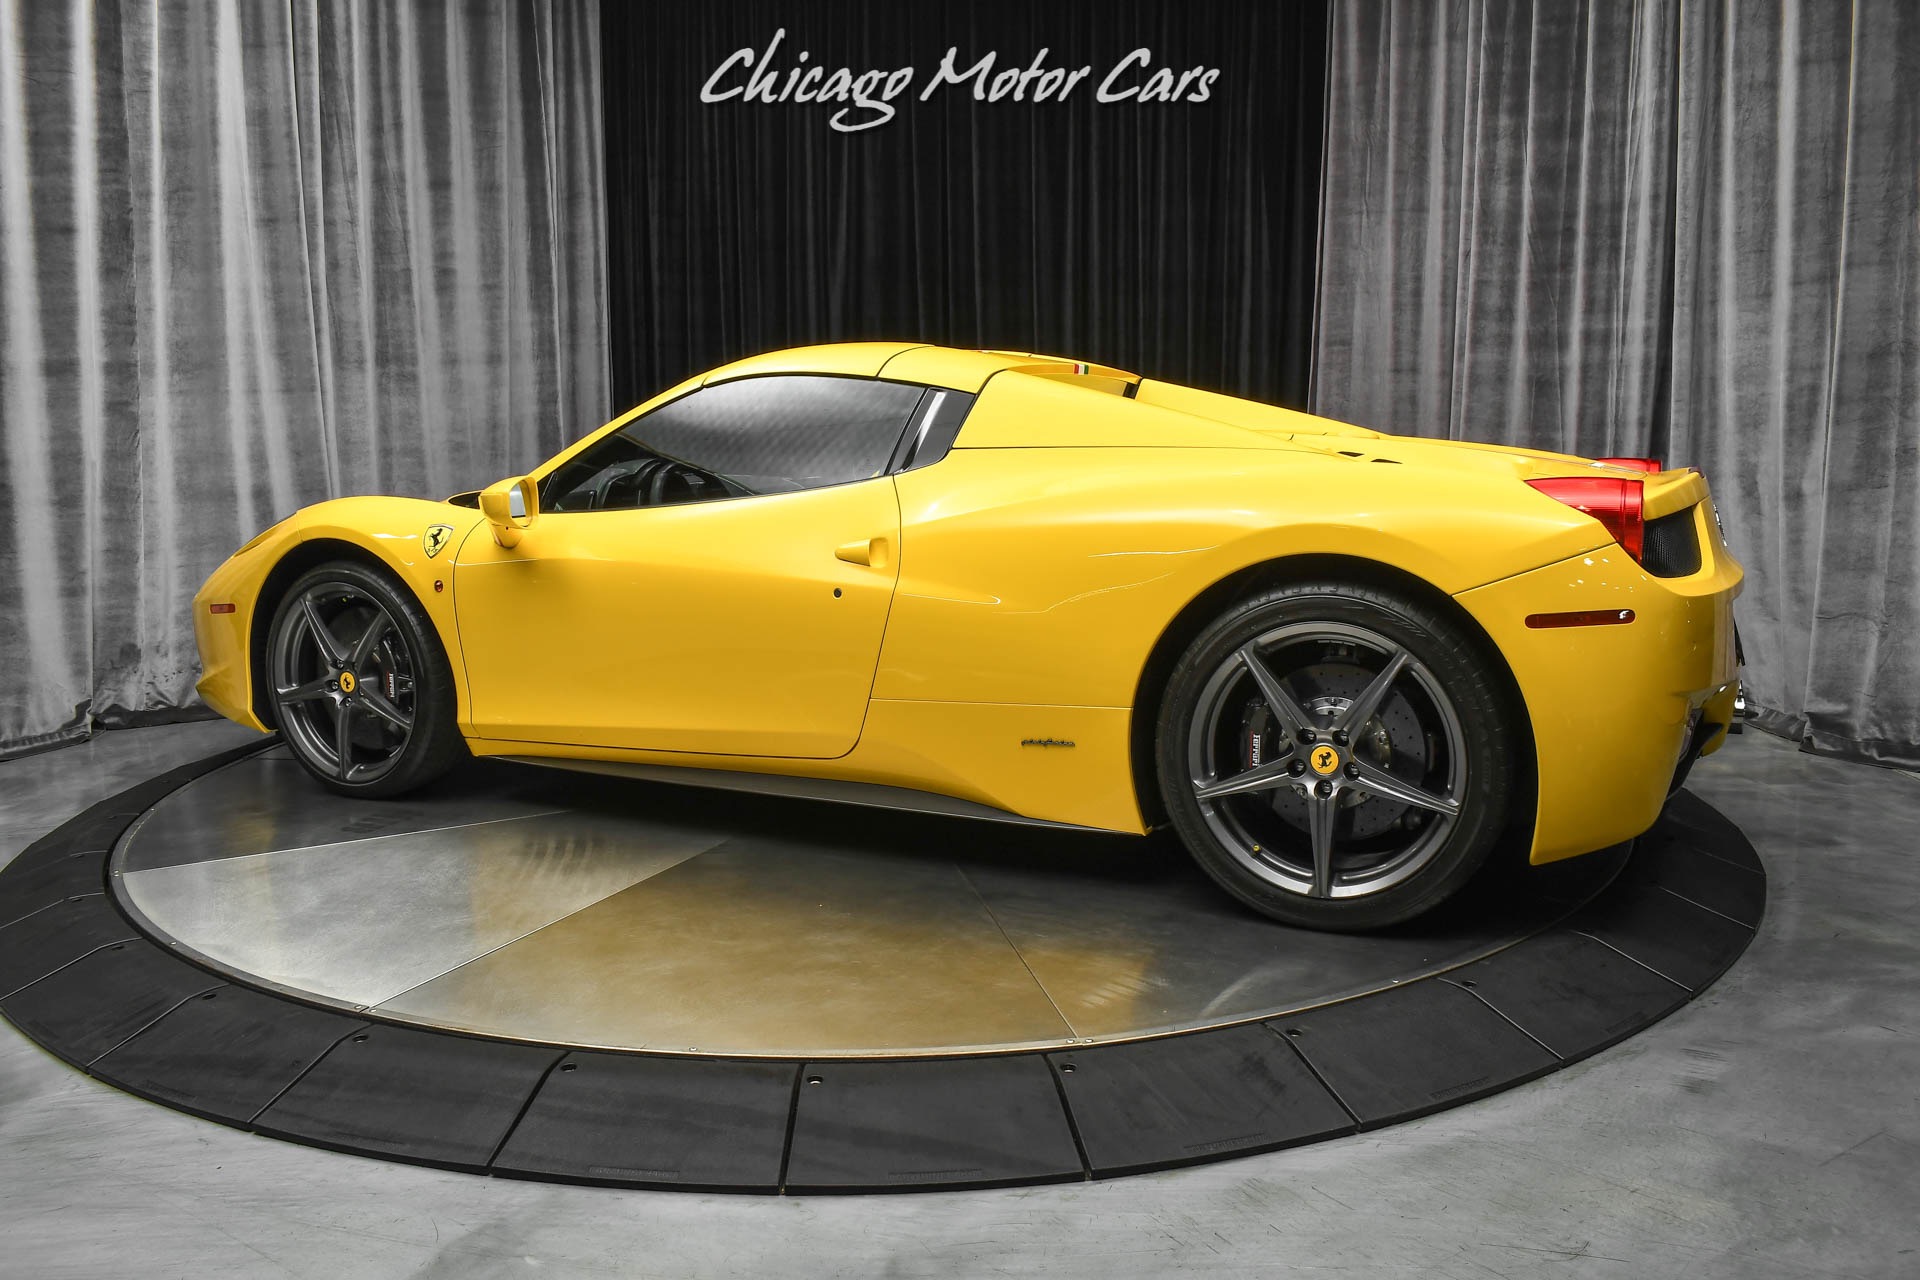 Used-2013-Ferrari-458-Spider-LOADED-Carbon-Fiber-Race-Package-Lift-System-Low-Miles-PPF